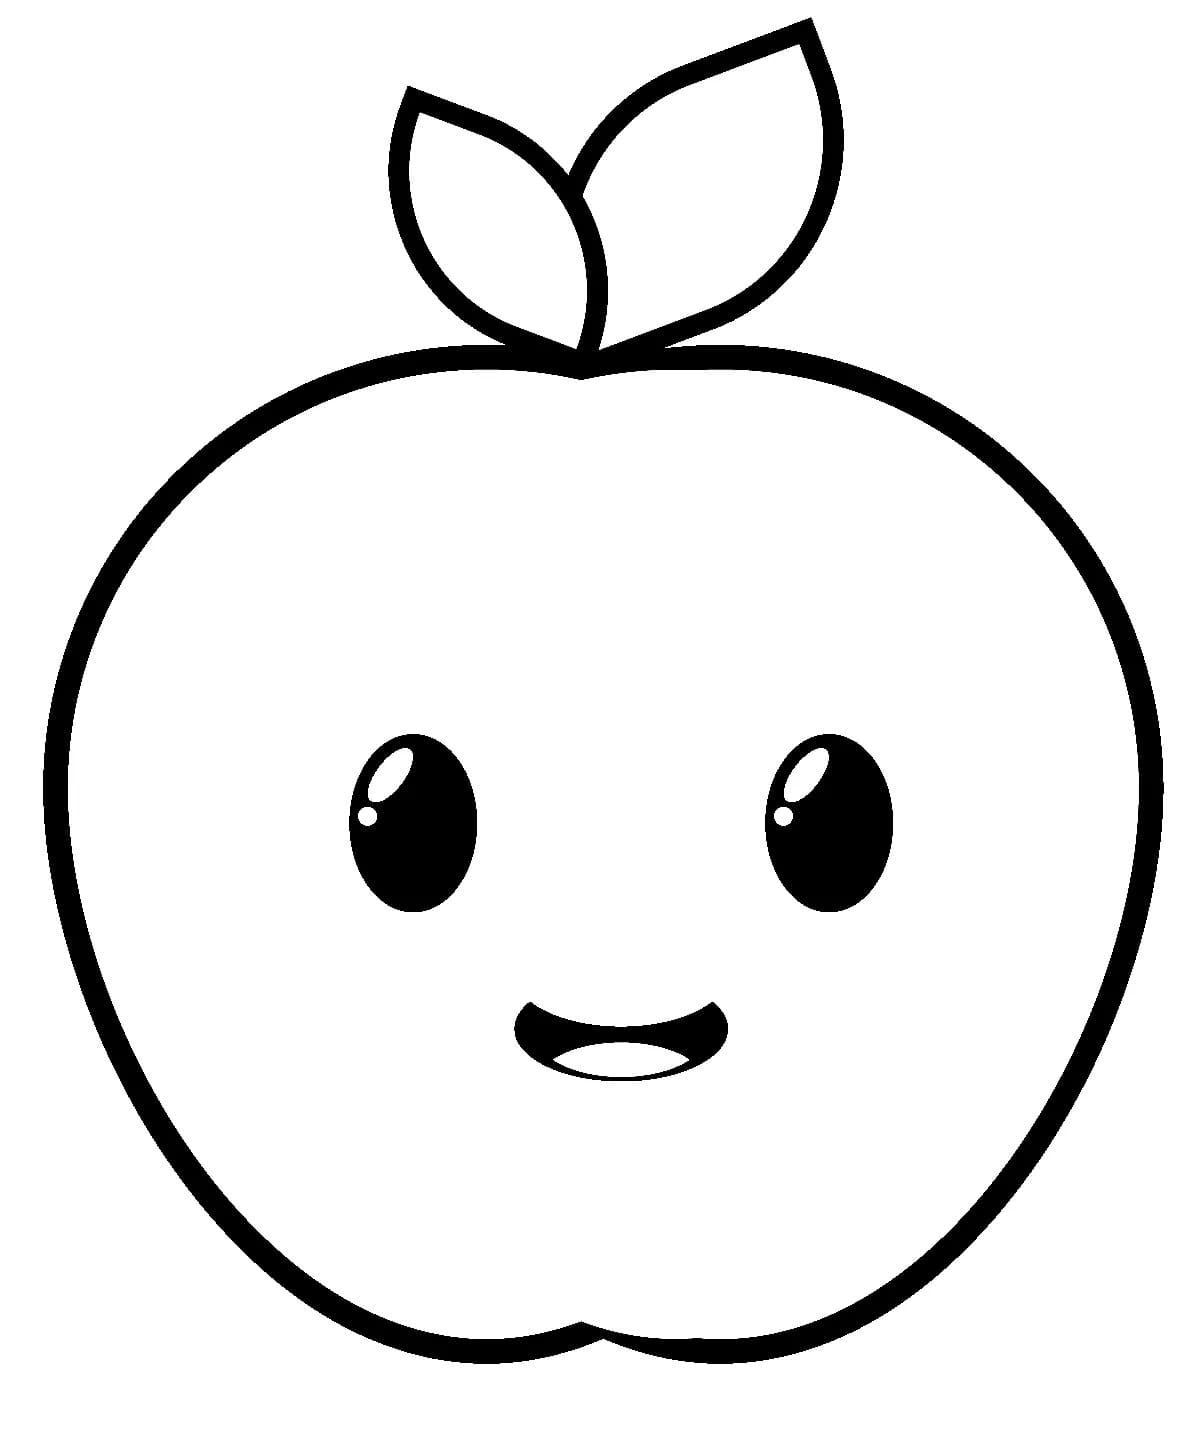 Printable cute apple coloring page